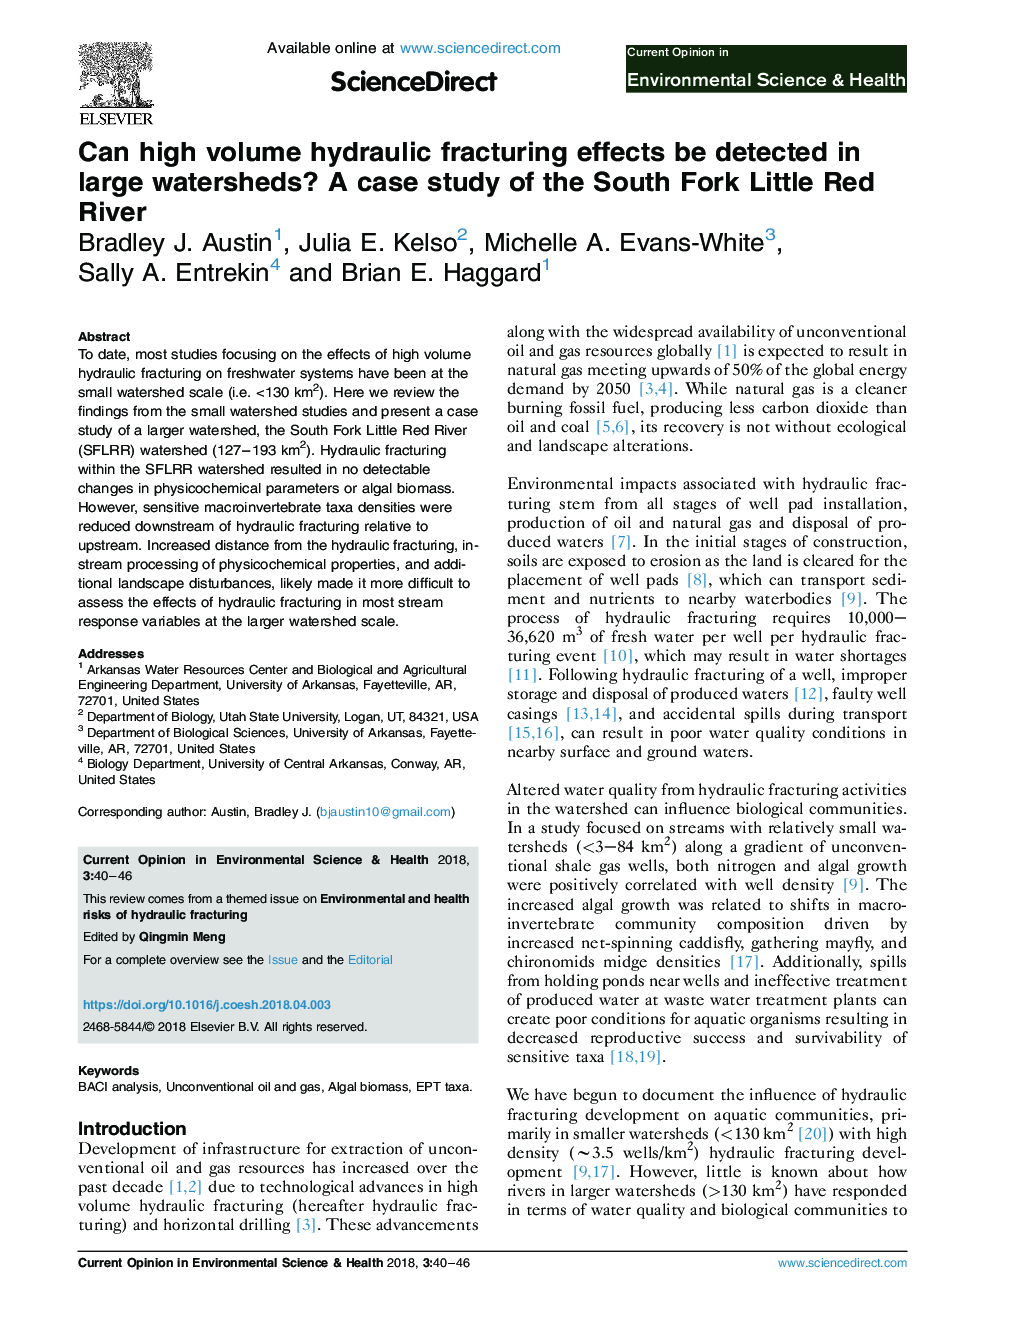 Can high volume hydraulic fracturing effects be detected in large watersheds? A case study of the South Fork Little Red River